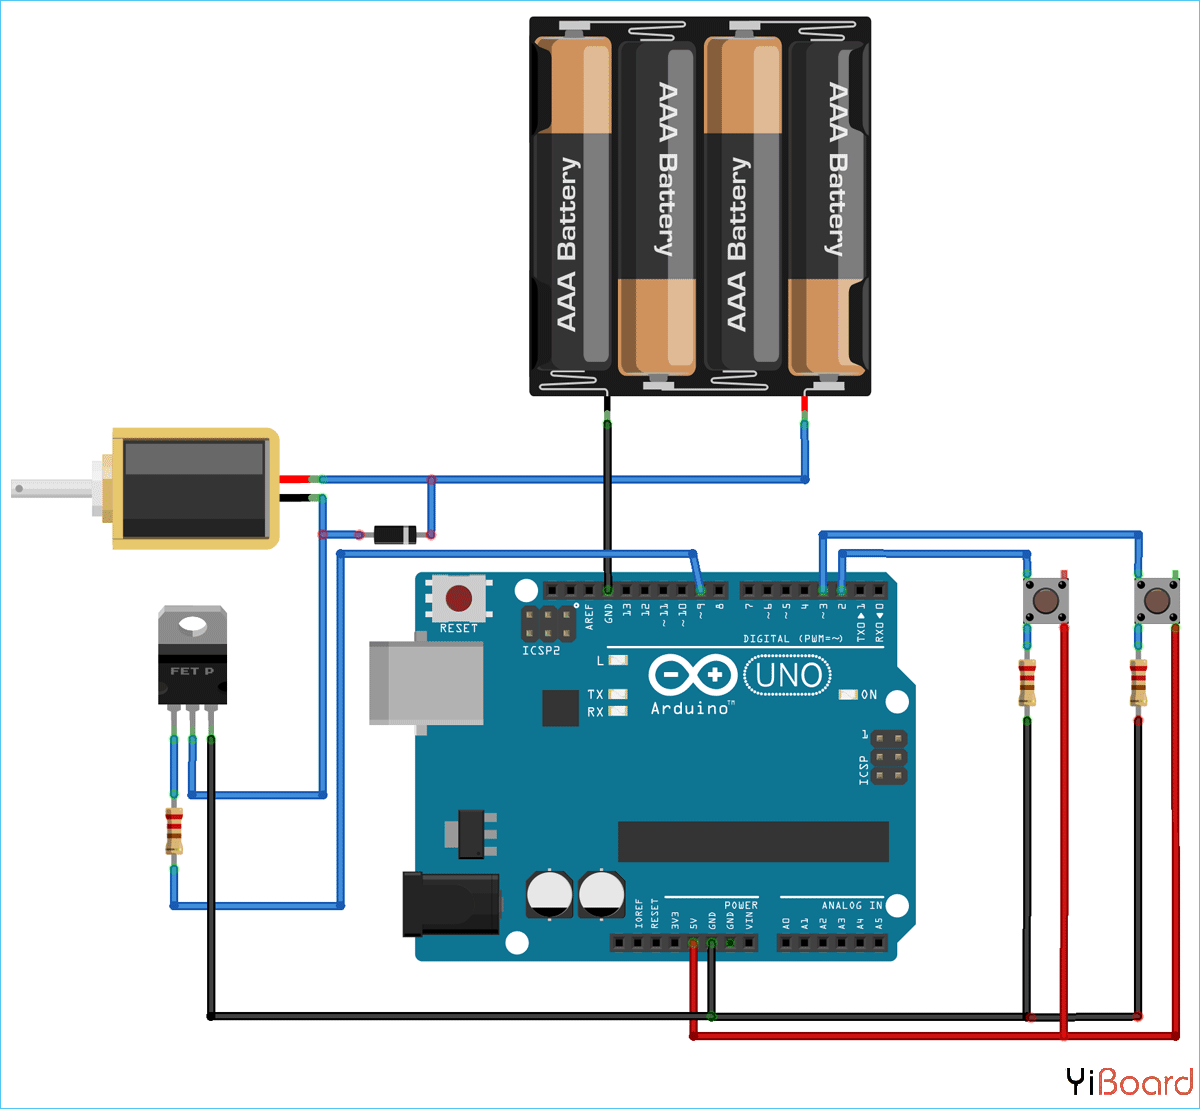 Circuit-Diagram-for-controlling-a-Solenoid-Valve-with-Arduino.png